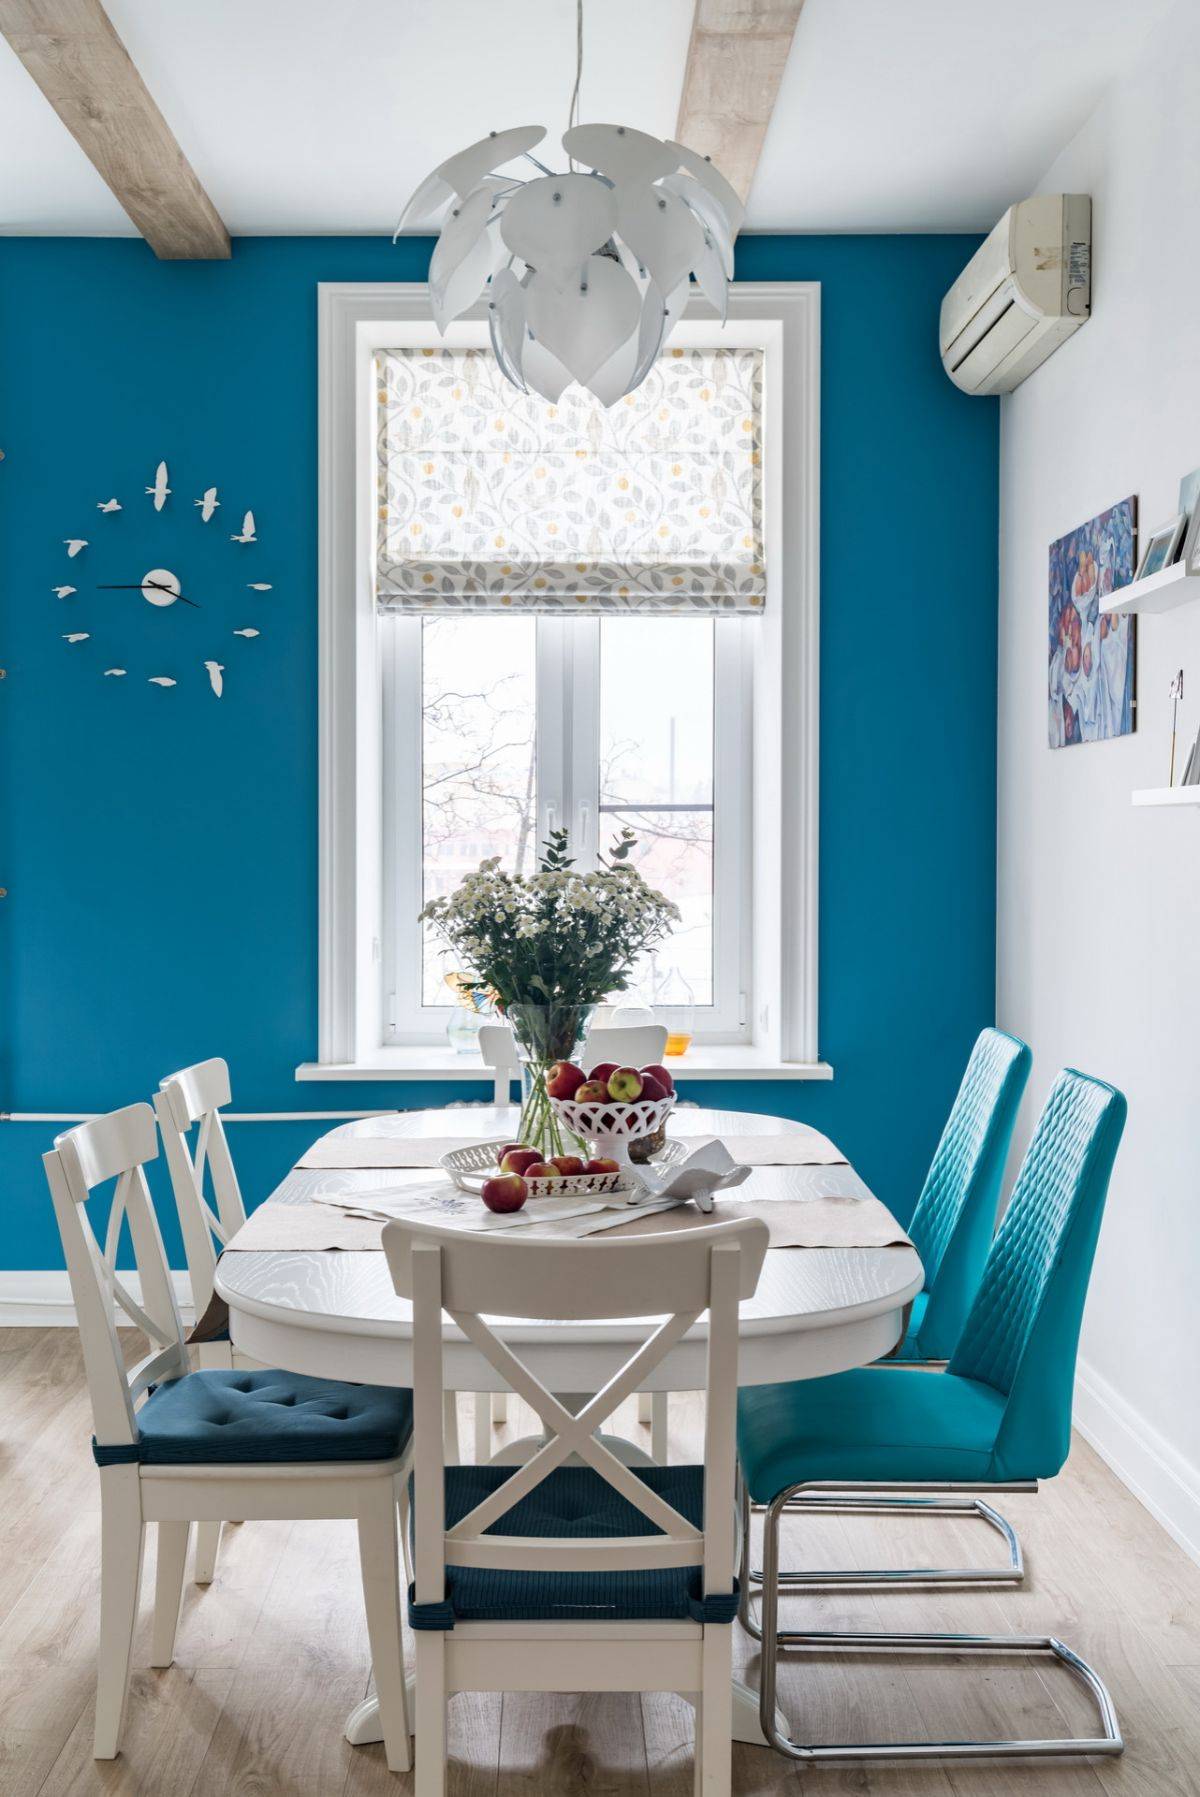 Try-out-different-dashing-shades-of-blue-in-the-modern-dining-space-82973